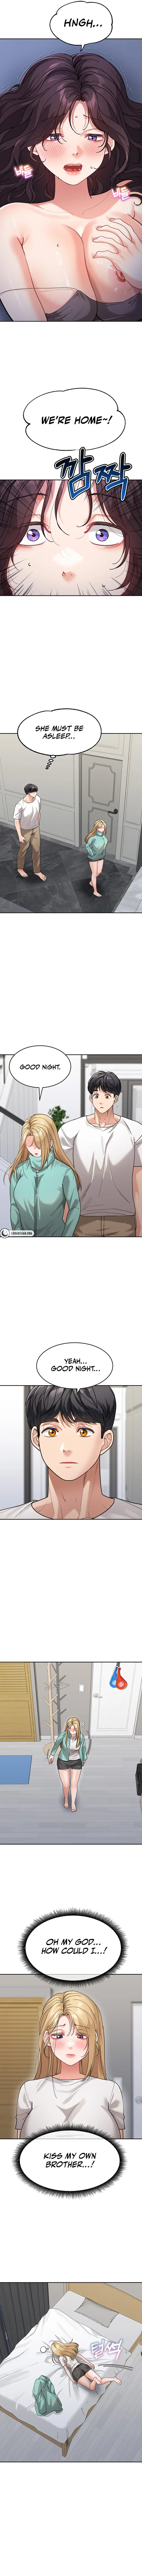 is-it-your-mother-or-sister-chap-32-3